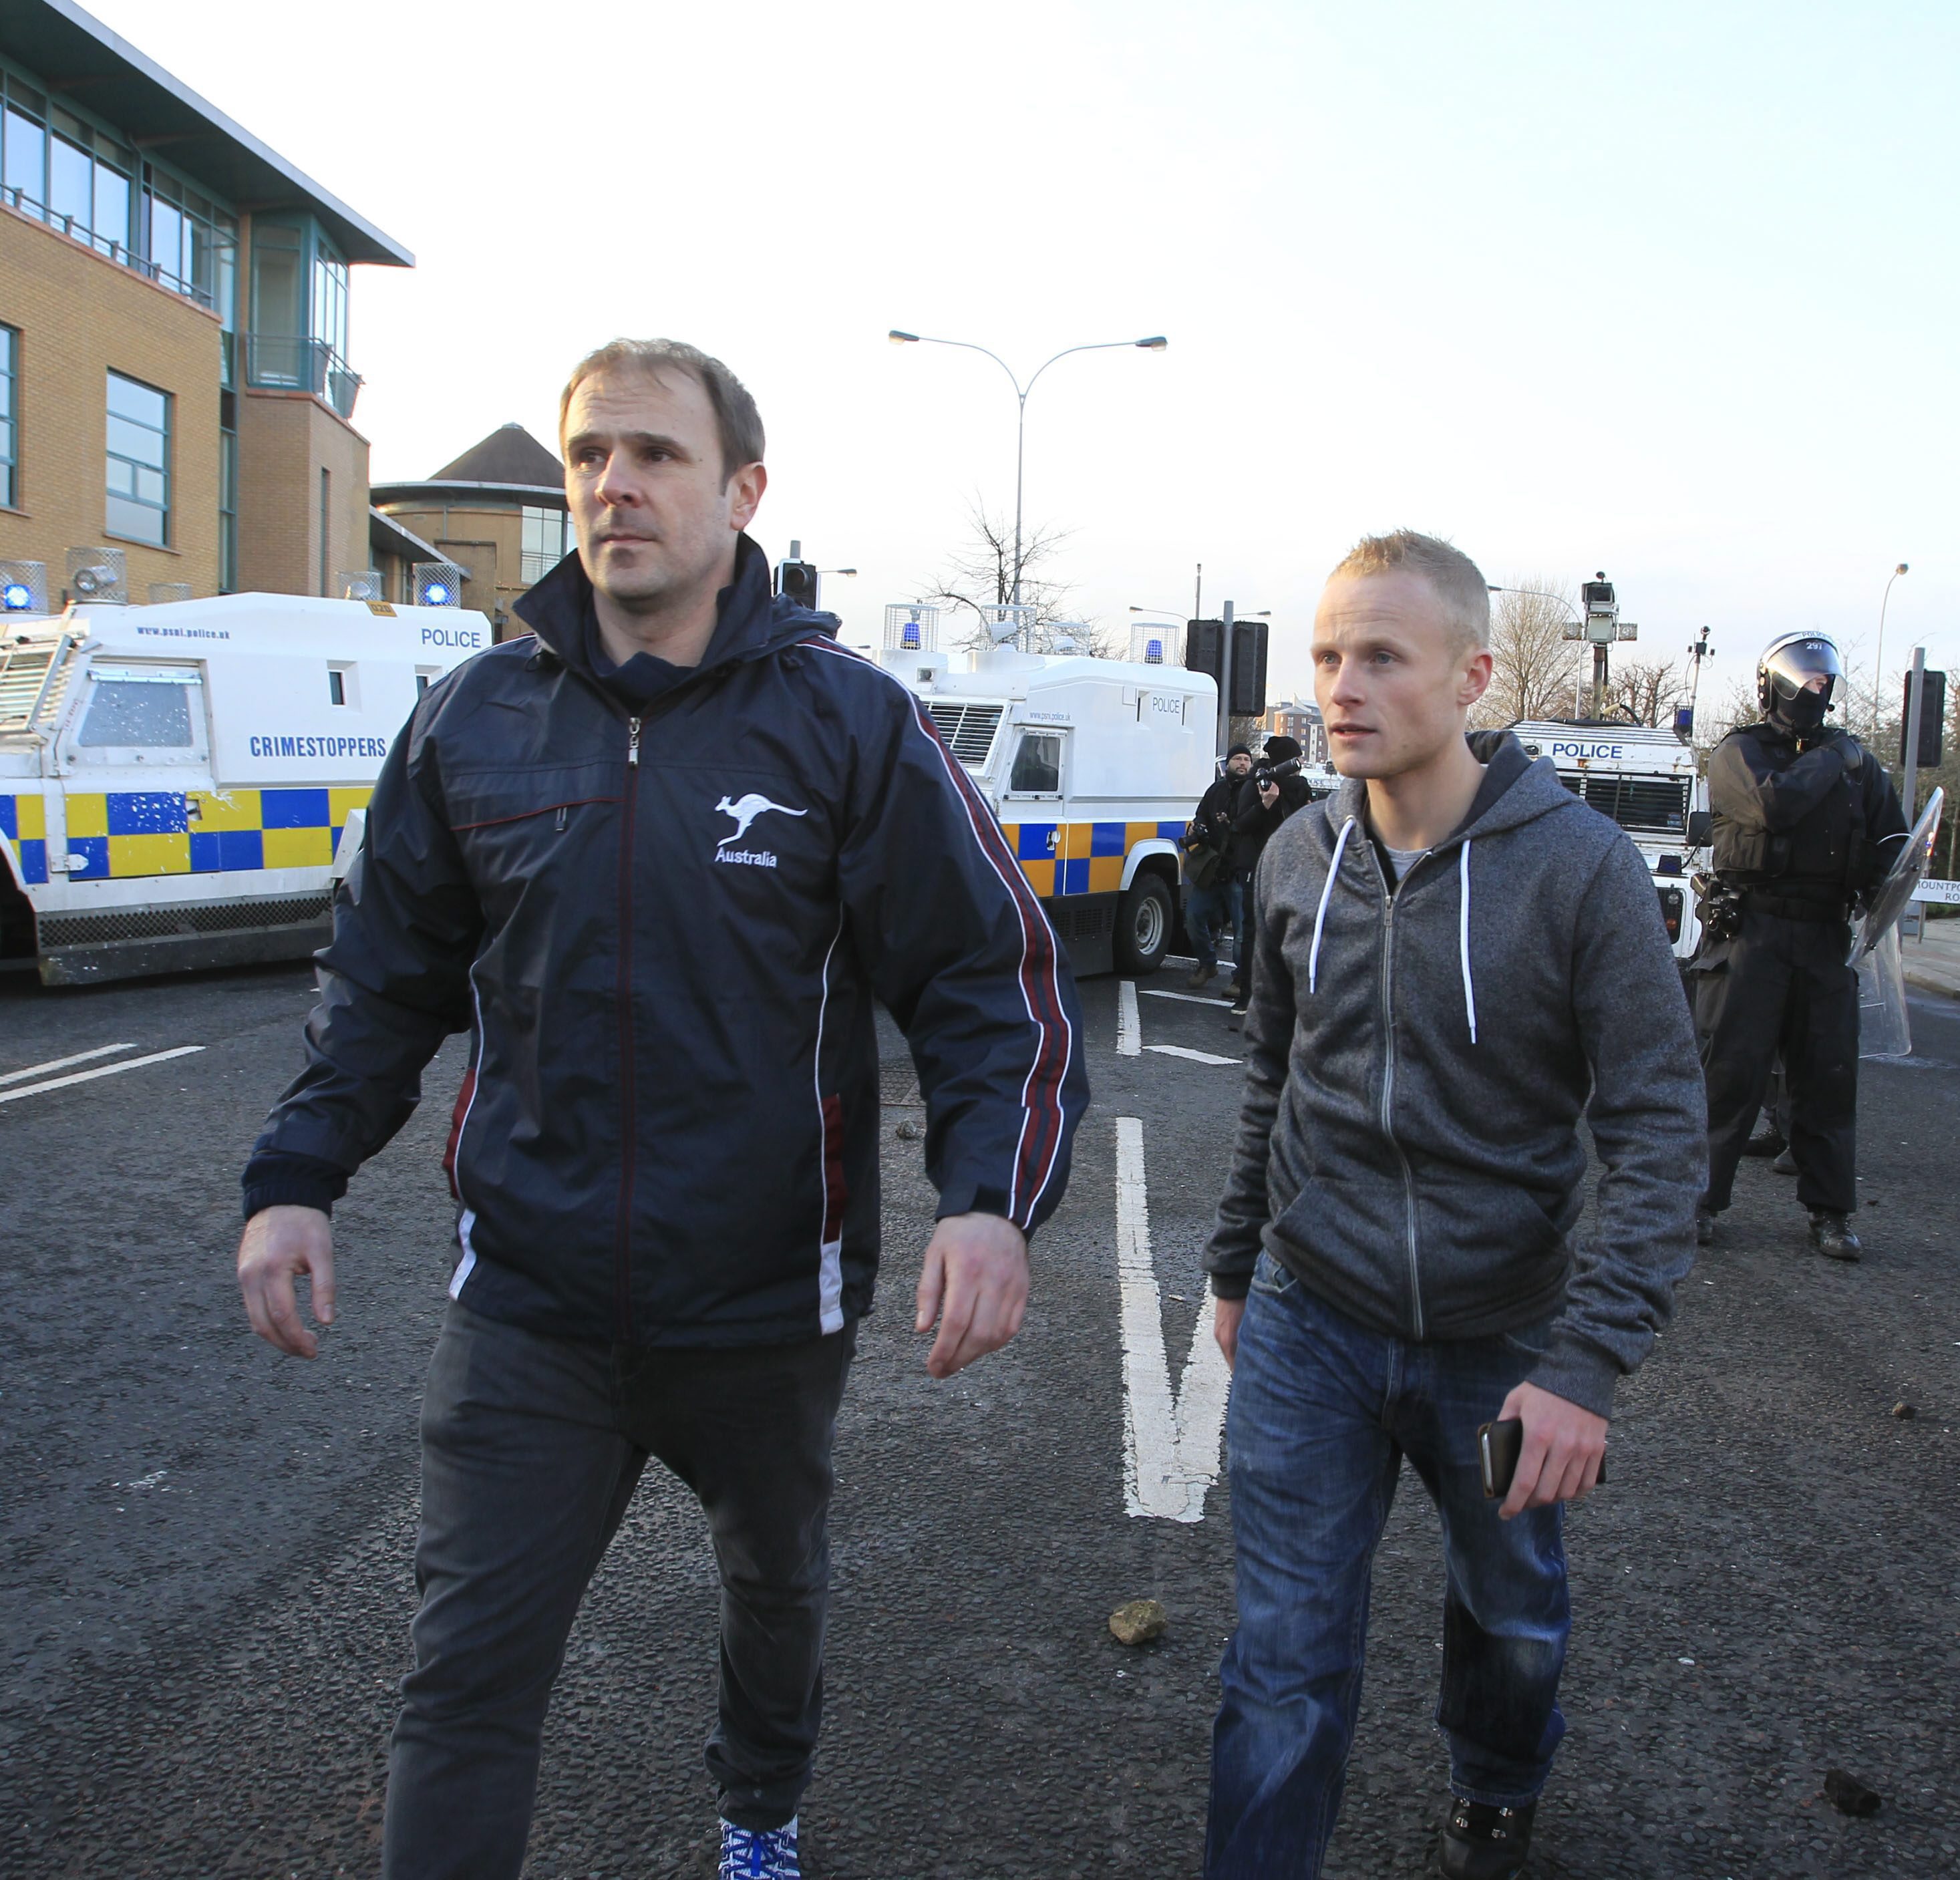 Loyalist Winky Irvine a member of the Unionist forum and Jamie Byrson of the Ulster People forum try to calm the violence.